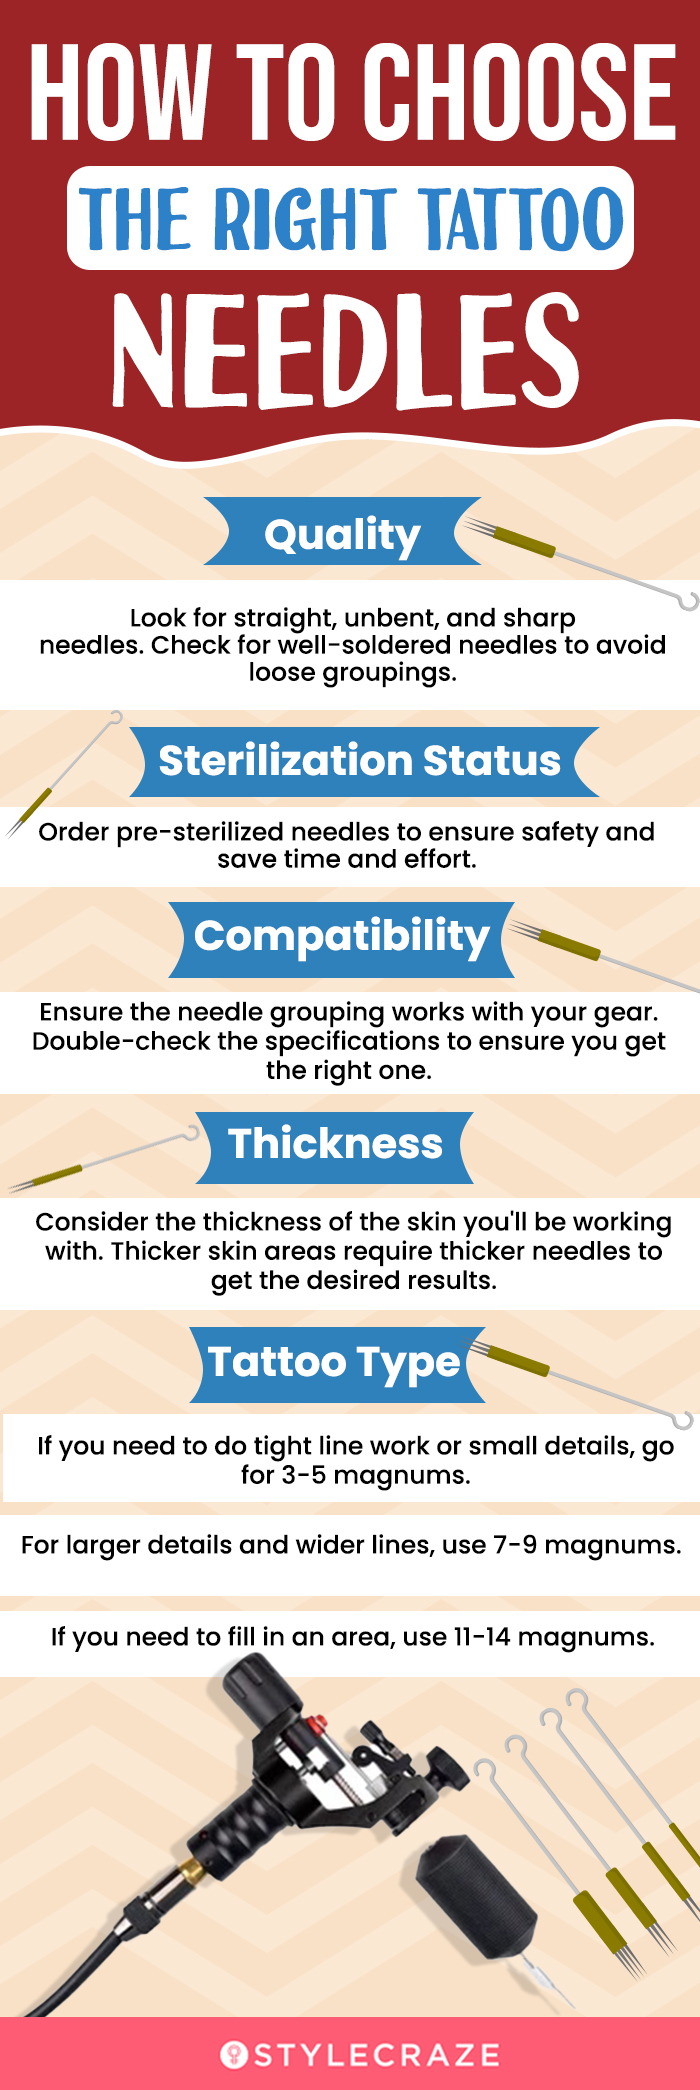 9 Different Types Of Tattoo Needles (infographic)